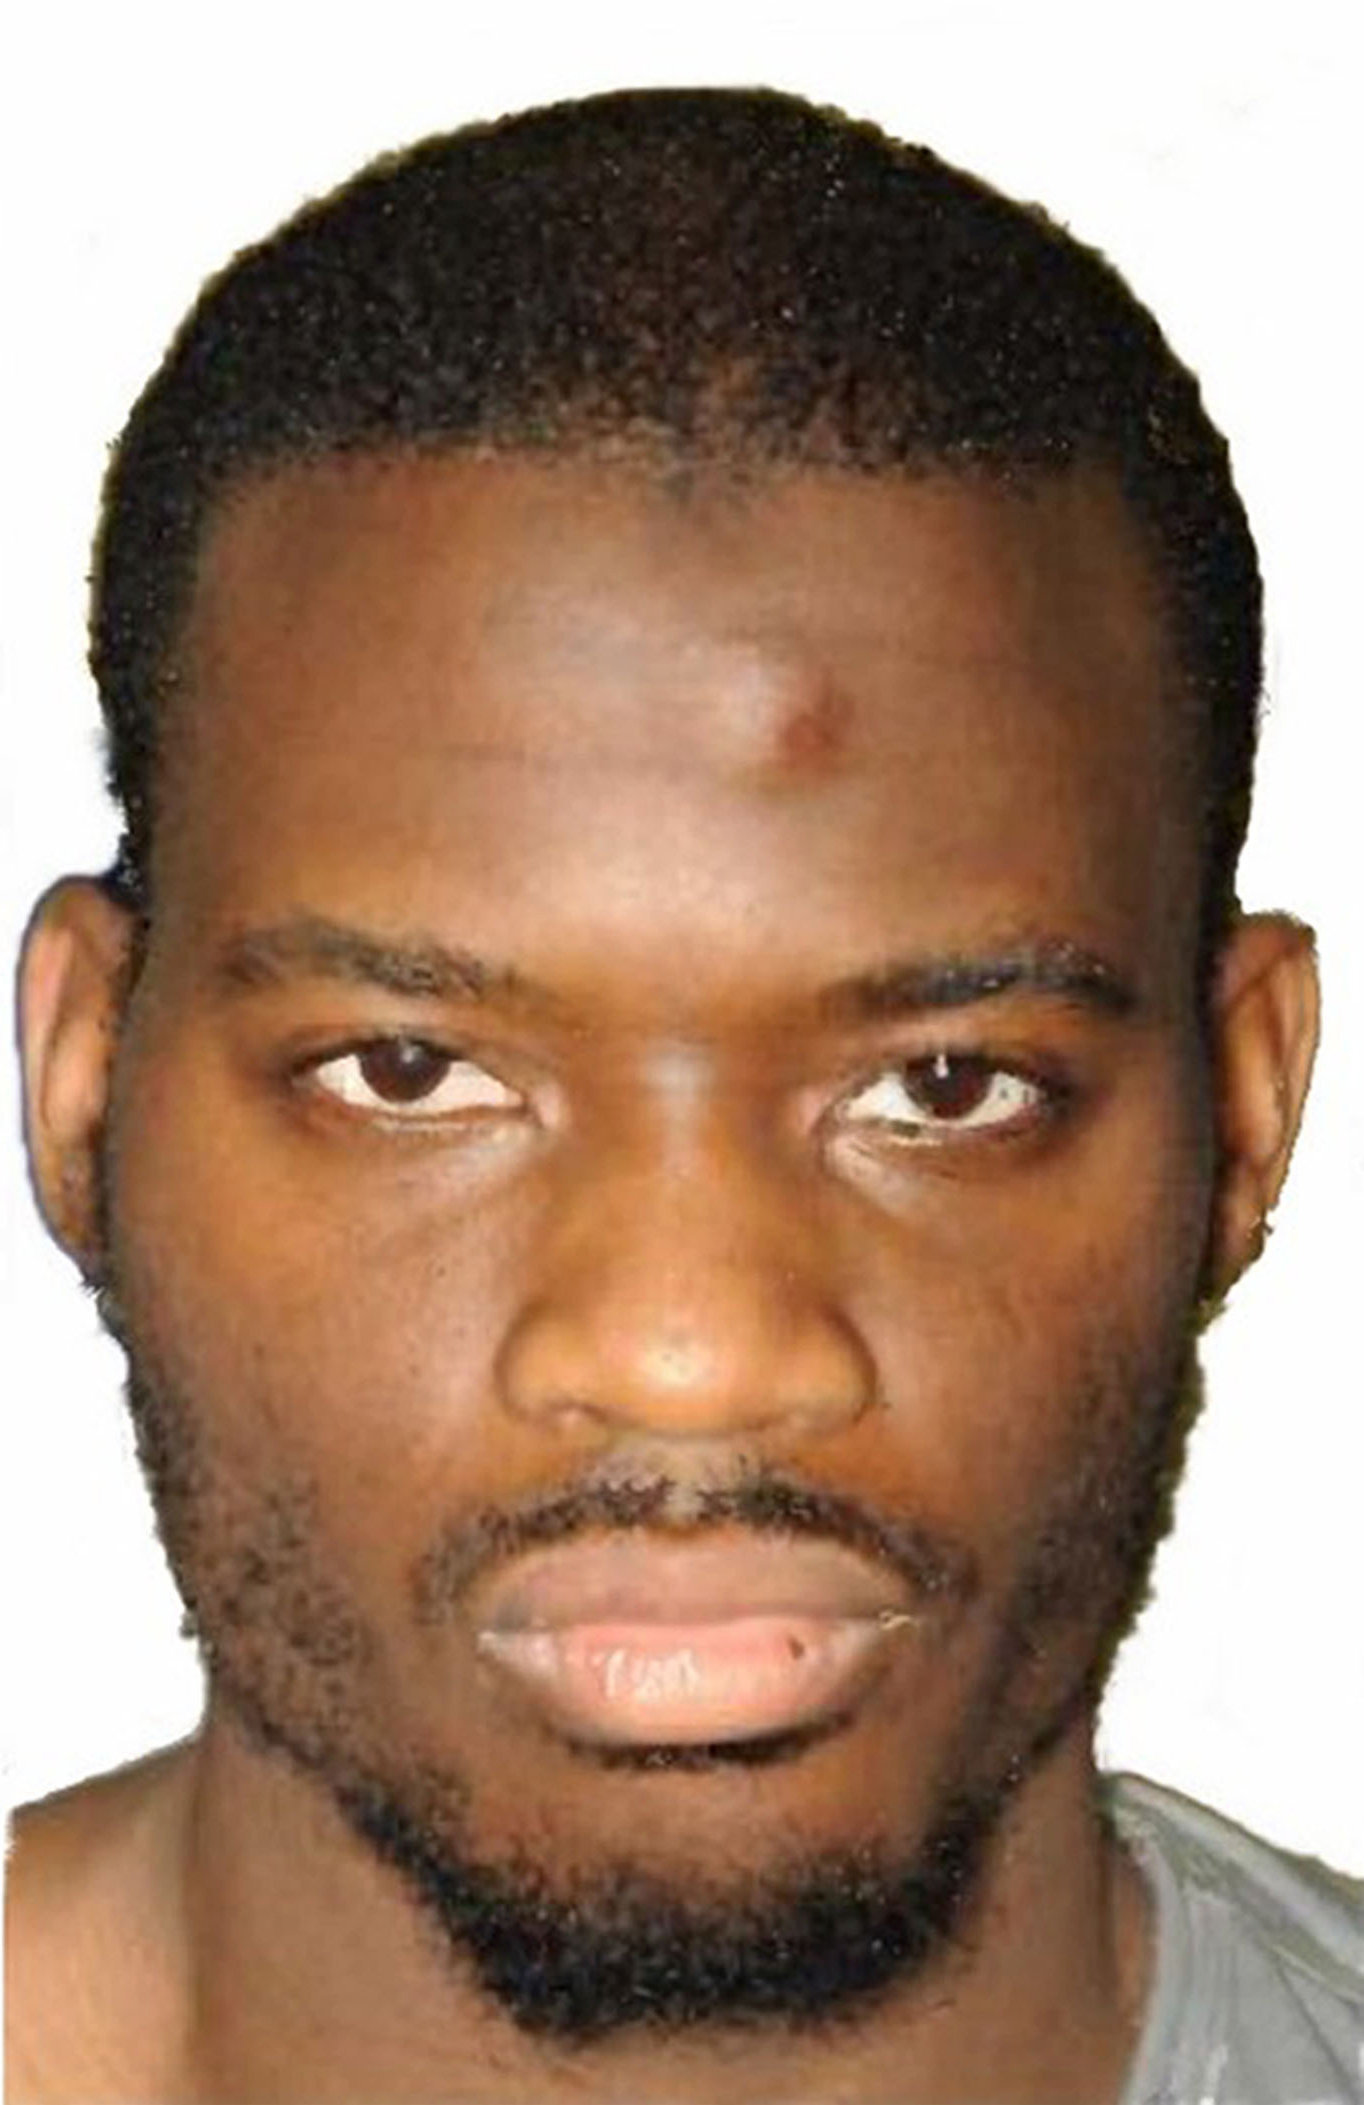 <strong>Details of Michael Adebolajo's jailhouse popularity have emerged as he is seeking compensation after an incident in which he claims he was injured&nbsp; by prison officers&nbsp;</strong>